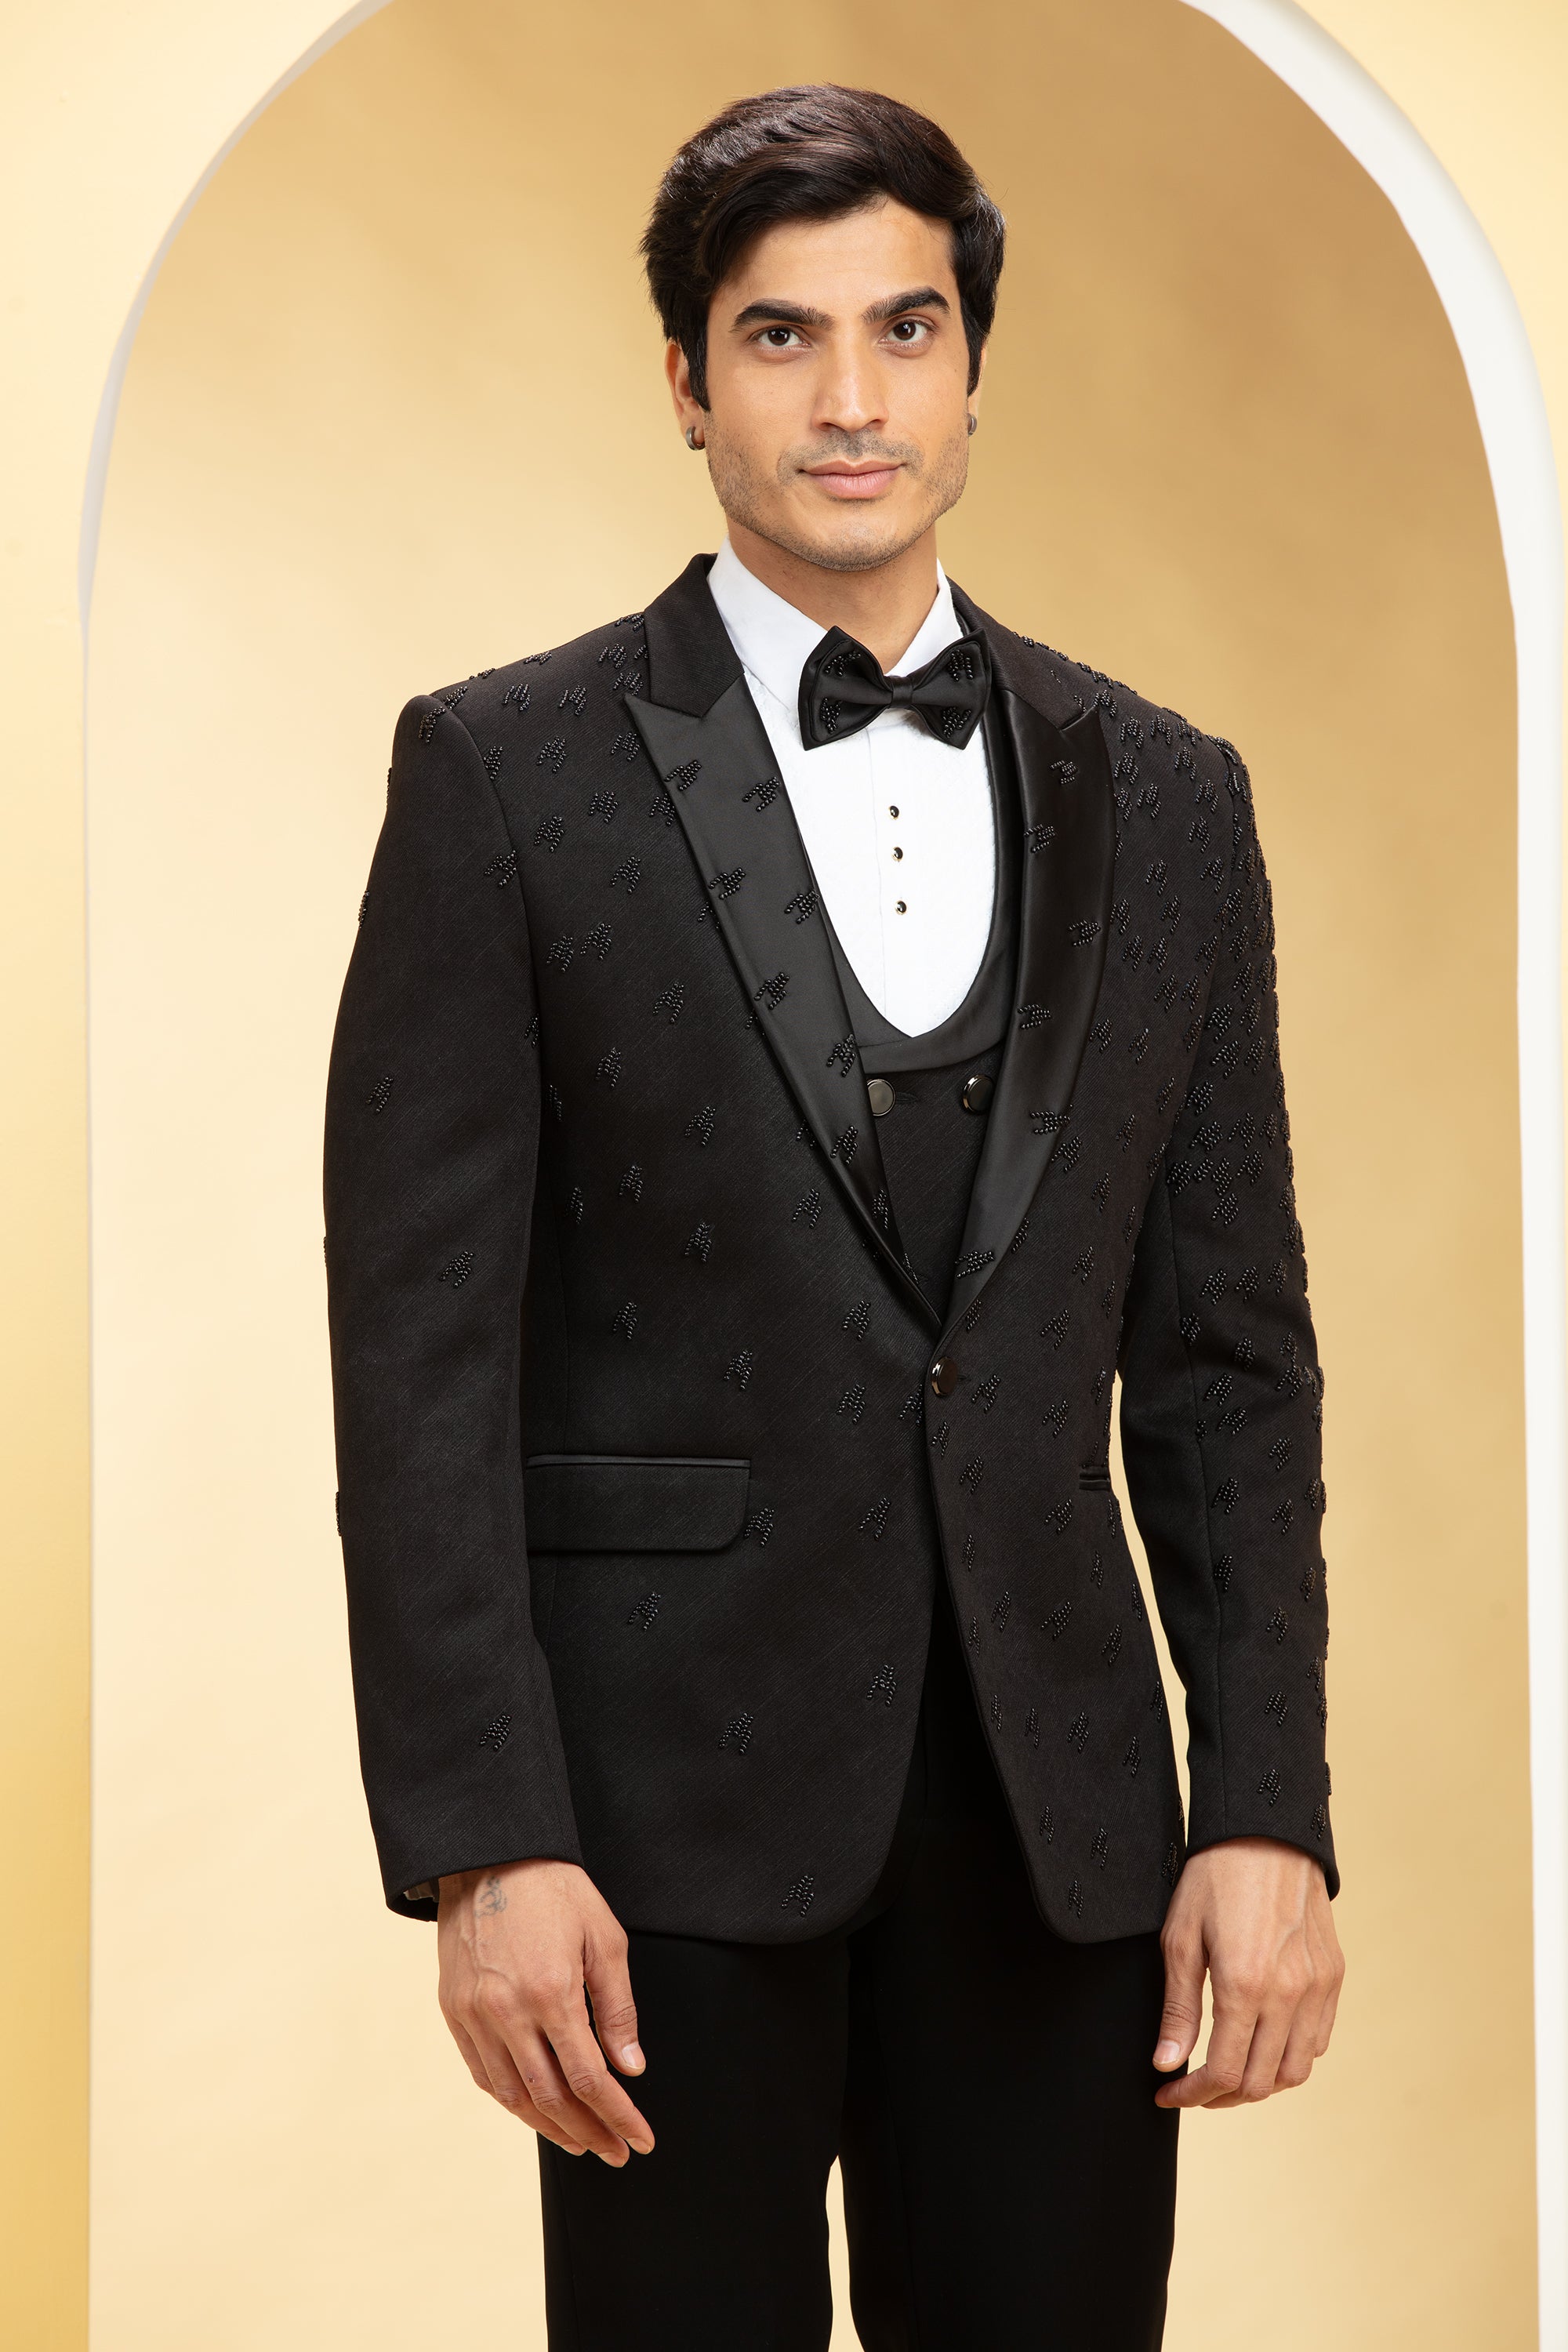 Raven Black Suede Tuxedo Set and Bow tie with Self cutdana work